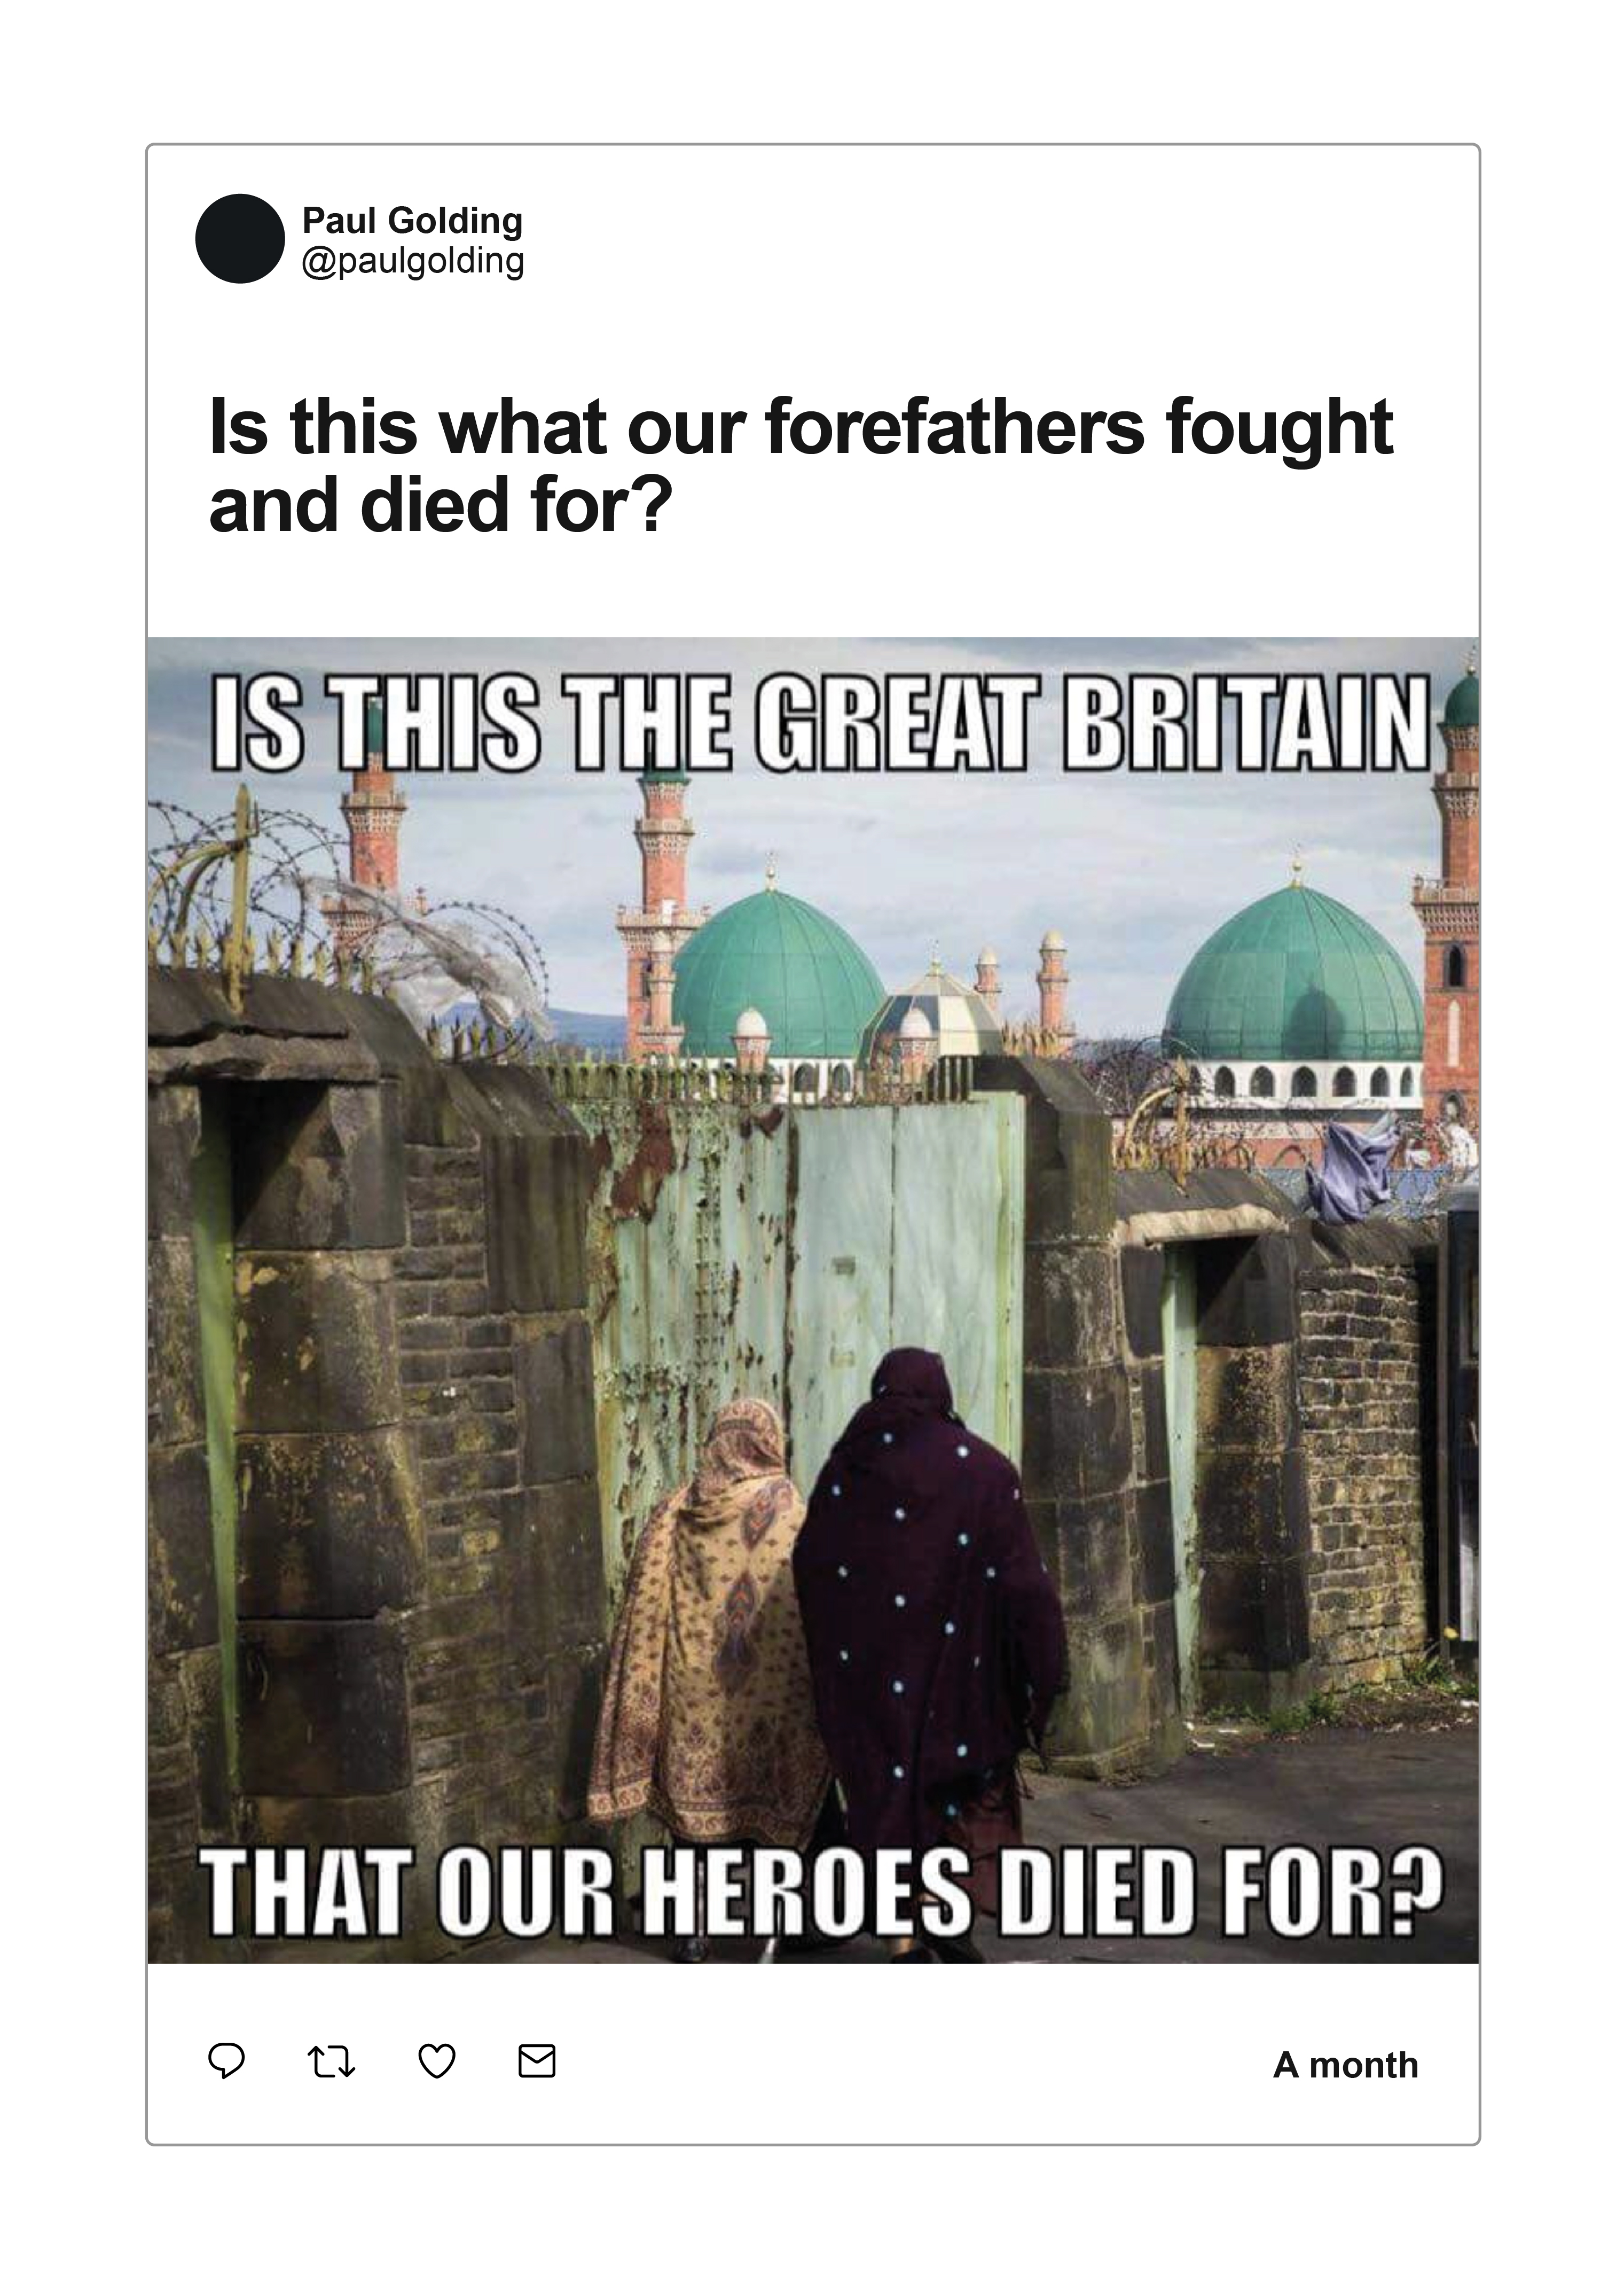 narratives-hate-spectrum-far-right-worldviews-uk - Figure 3.5: GAB Posts by Paul Golding and Jayda Fransen from Britain First about Islamisation